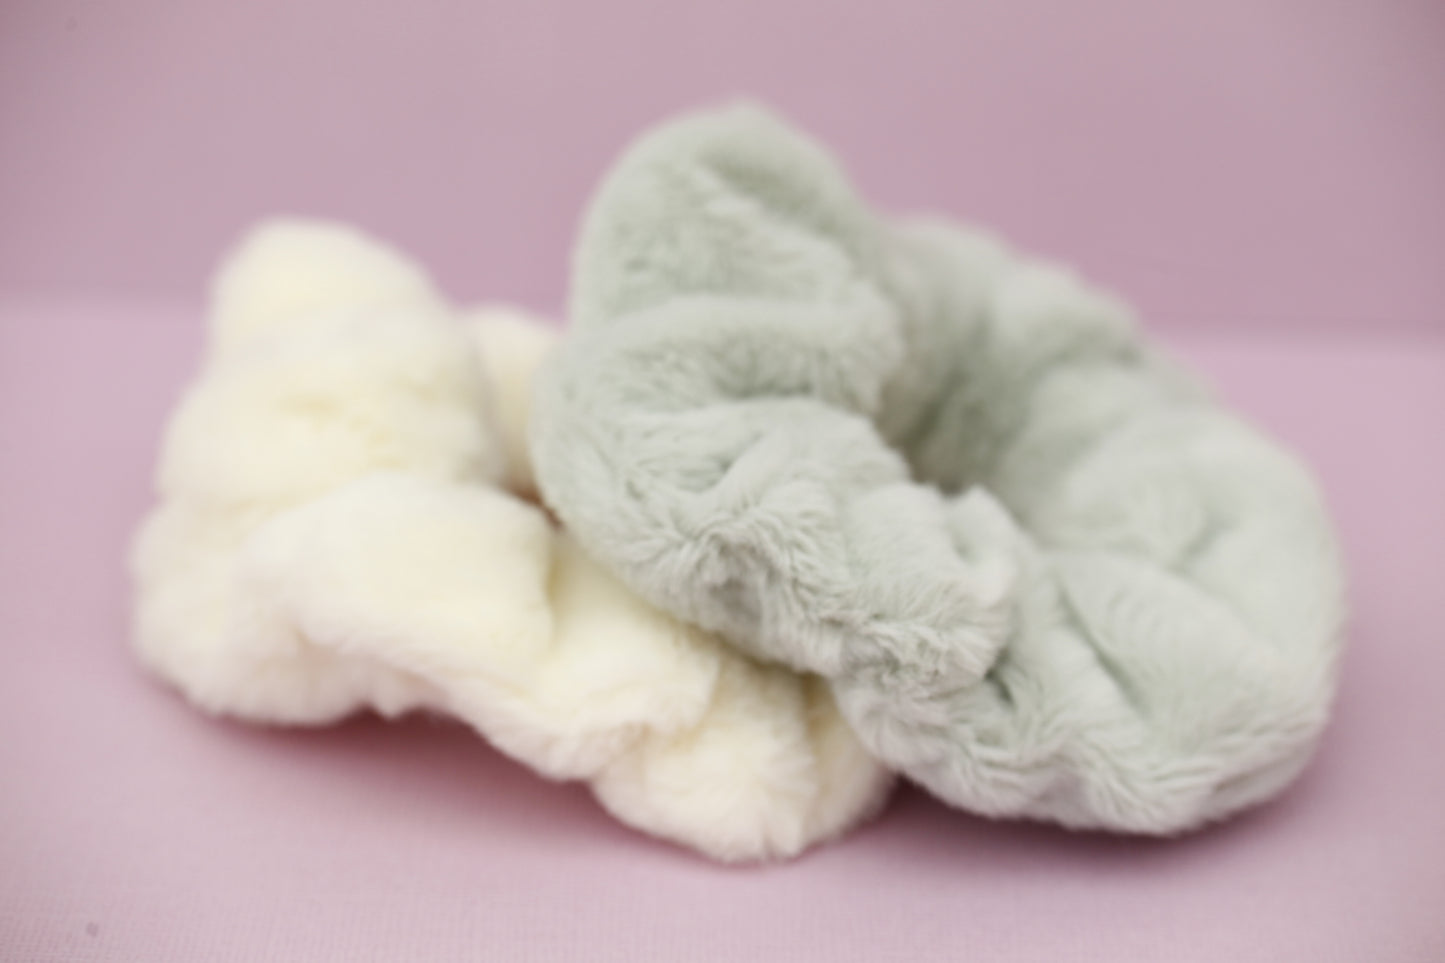 The Softies - Scrunchie 2 Pack.